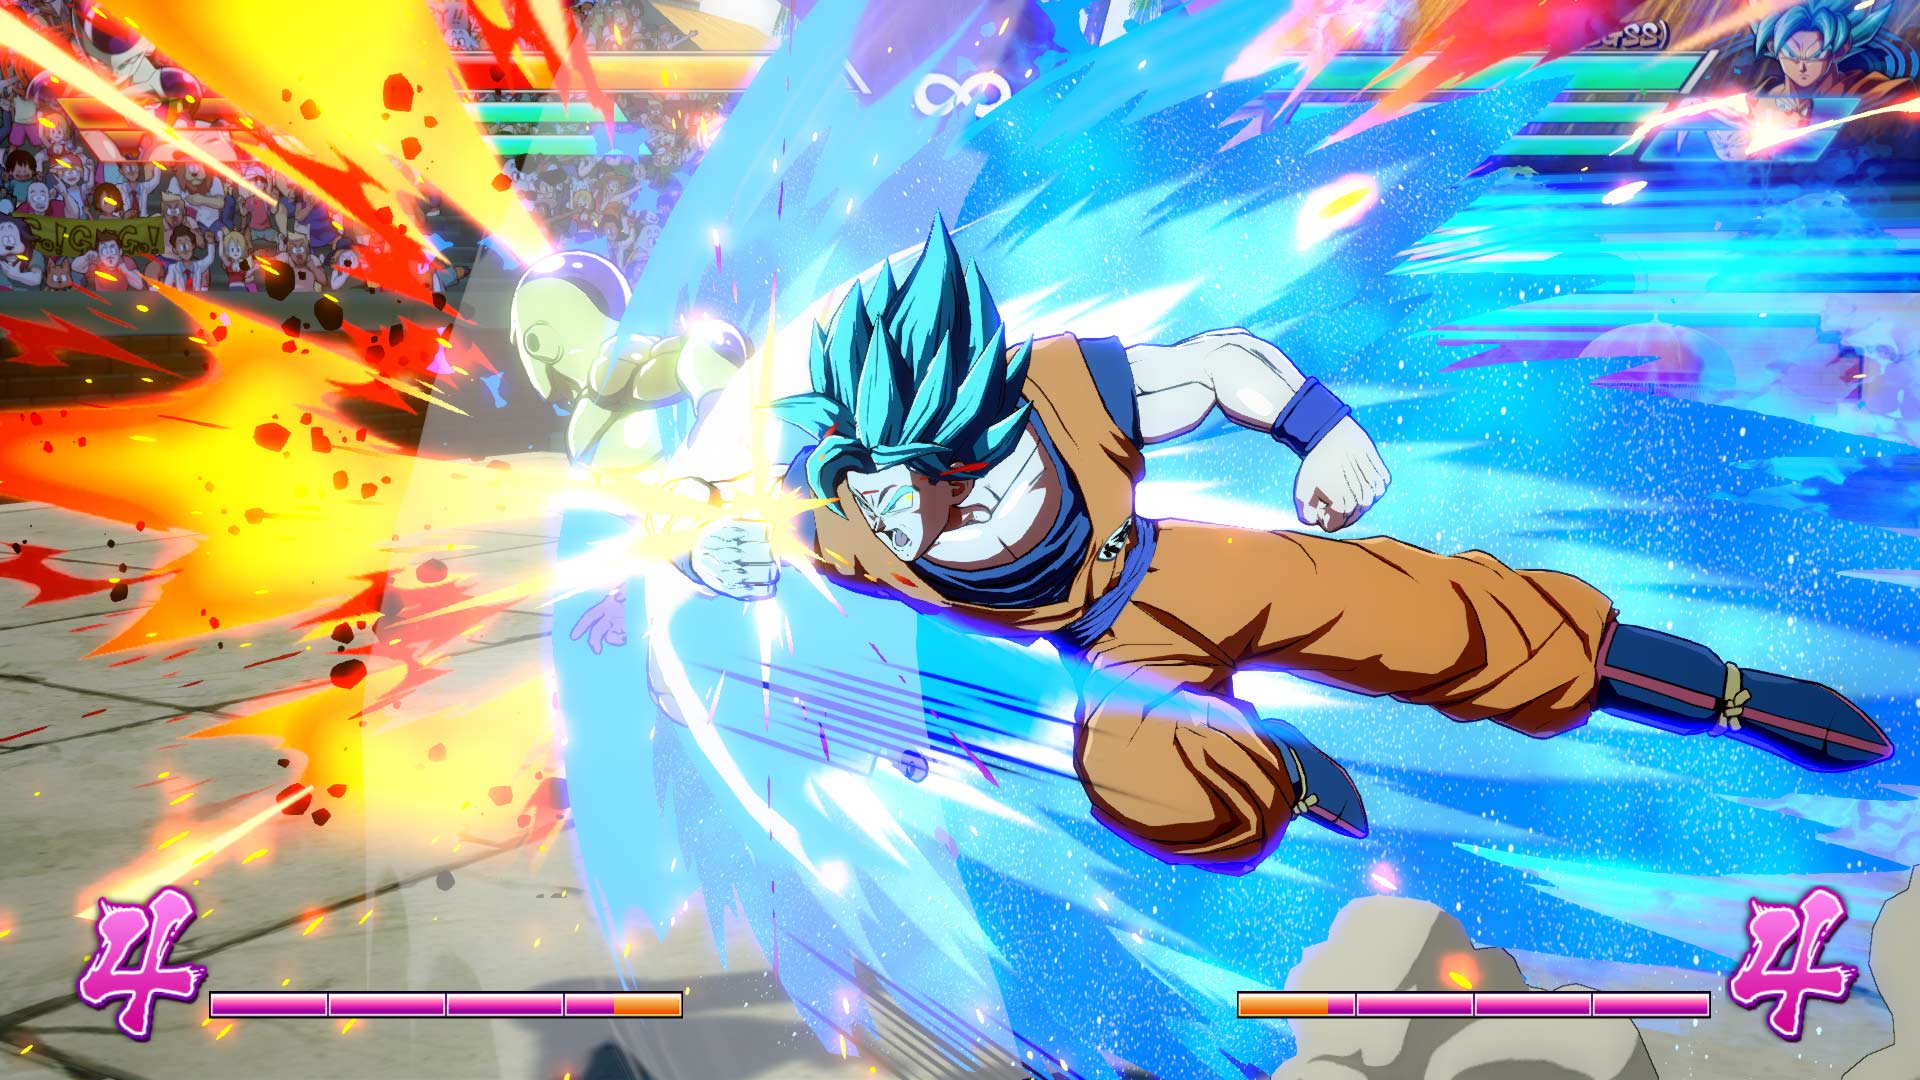 Dragon Ball FighterZ 1.11 Patch Introduces Balance Changes, New